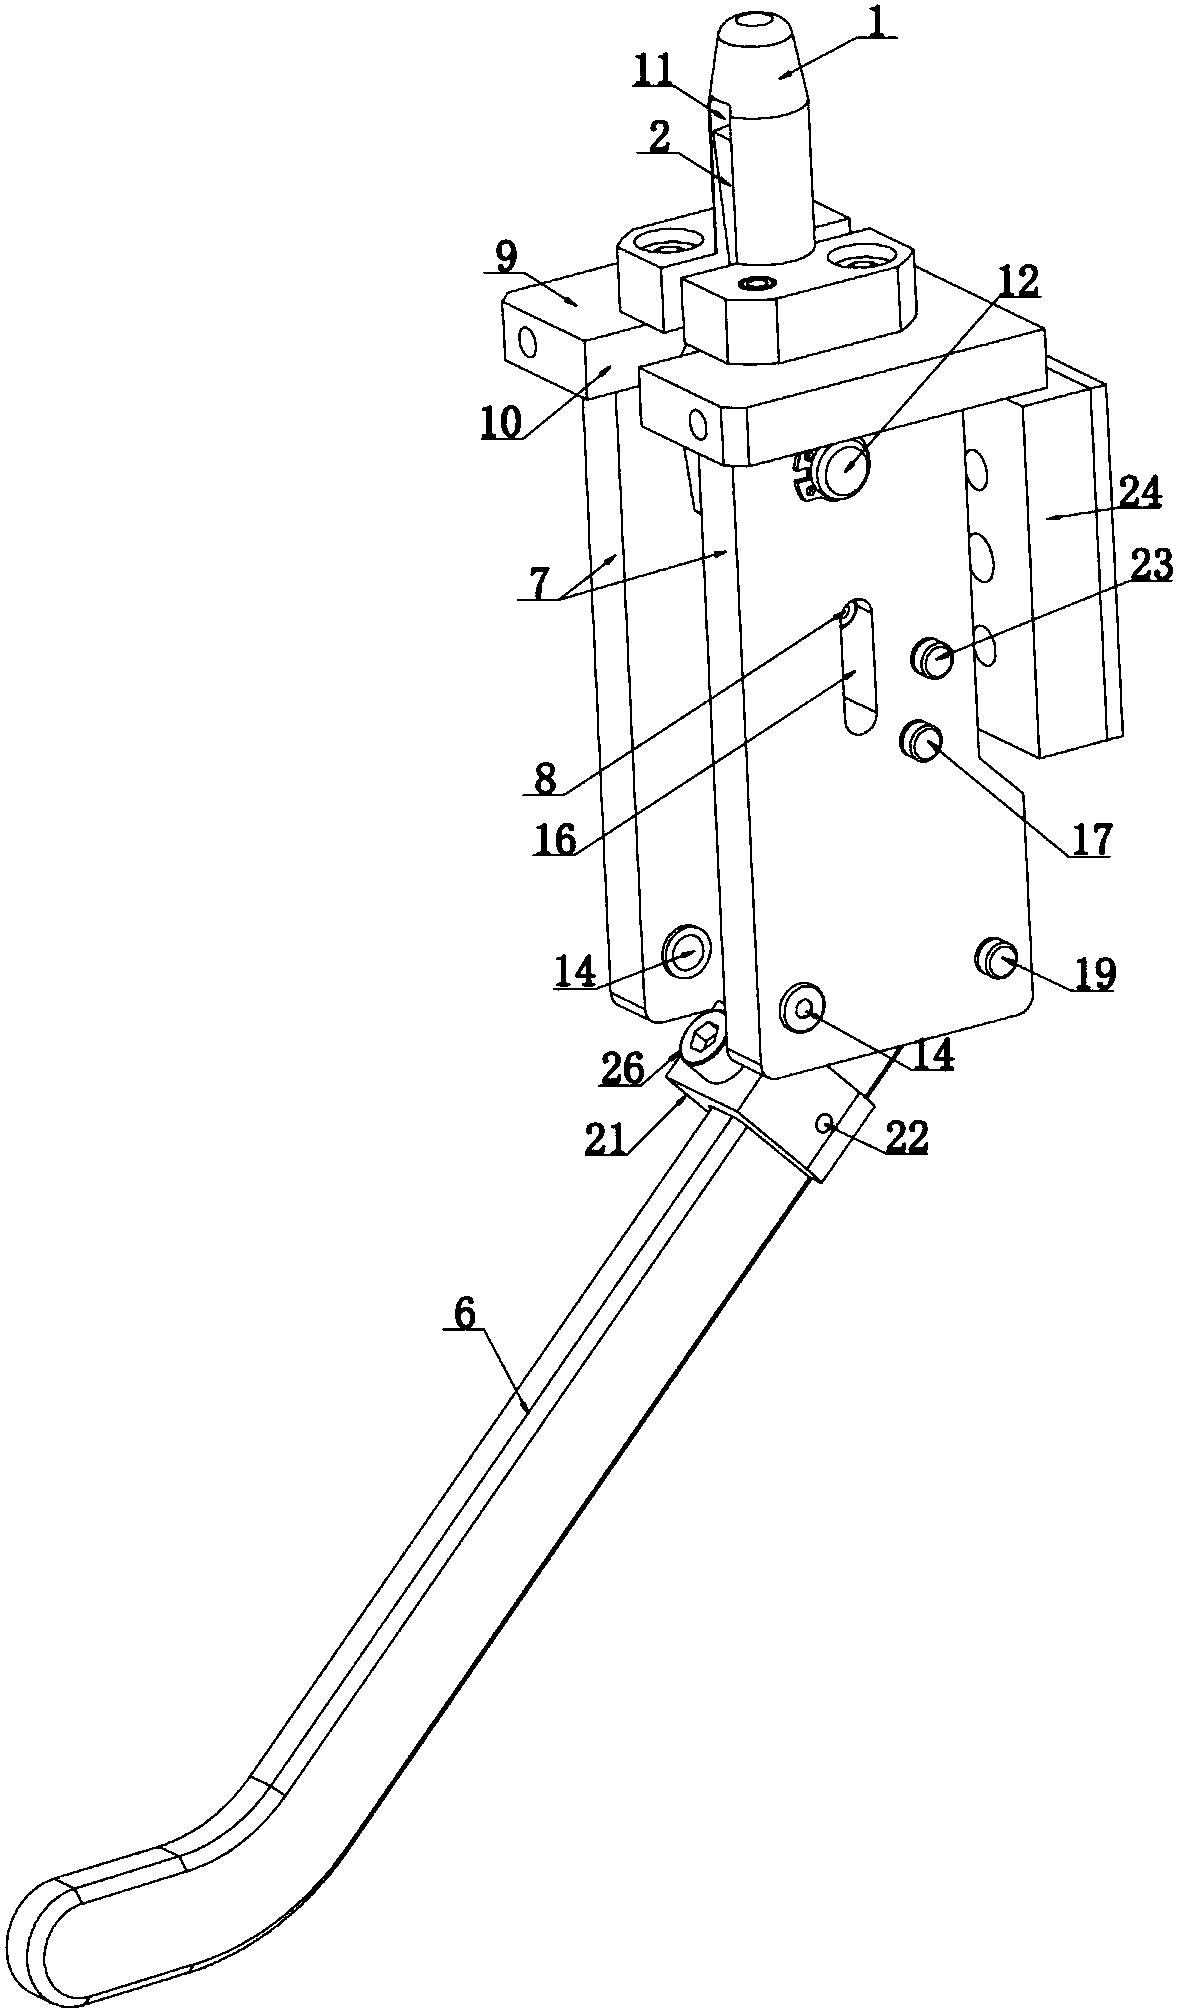 Manual positioning and compressing self-locking mechanism for track trolley